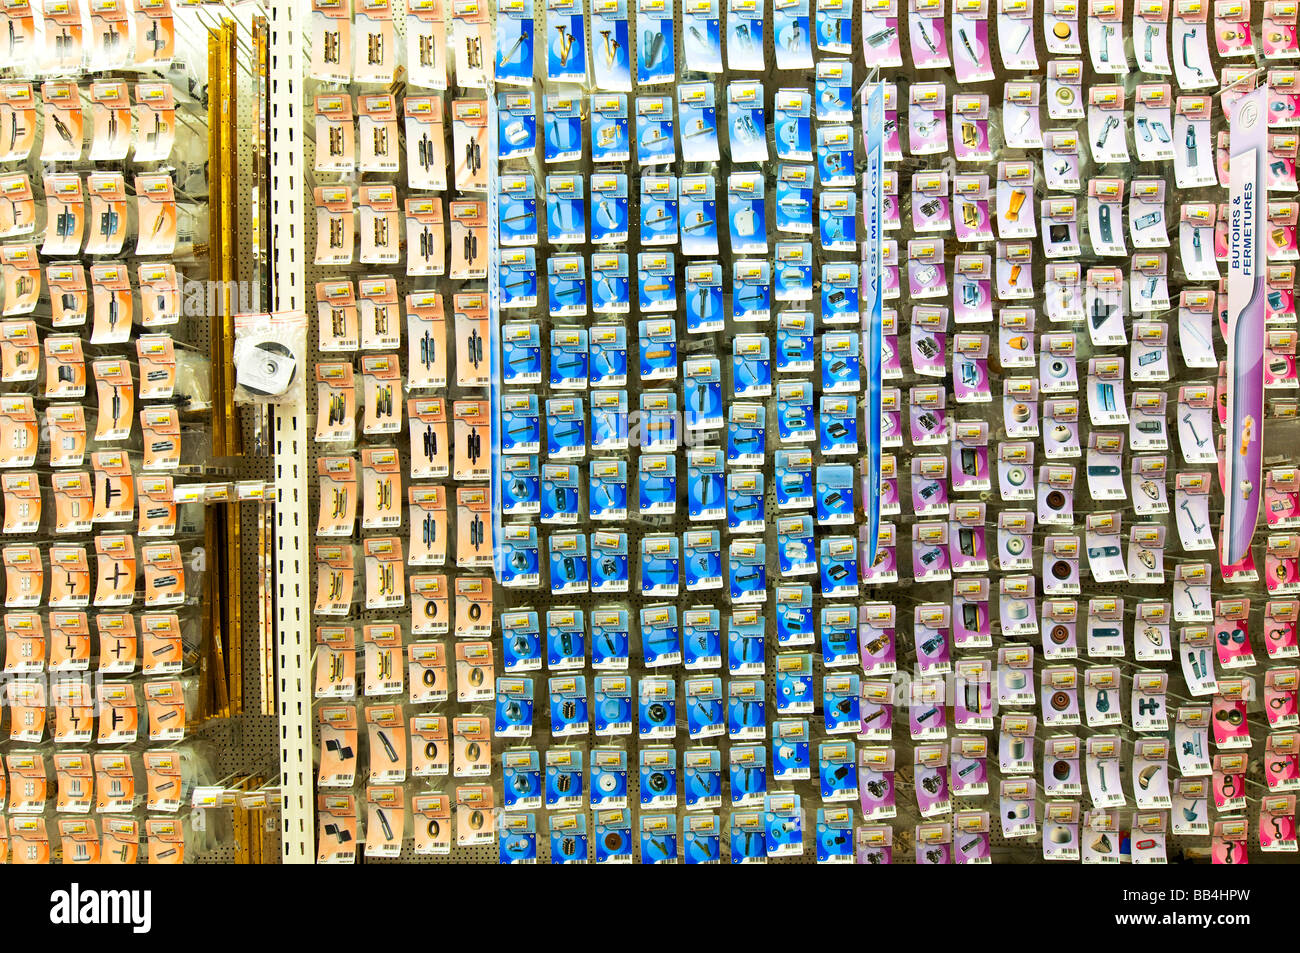 Domestic ironmongery display at 'Bricomarché' D-I-Y store, France. Stock Photo